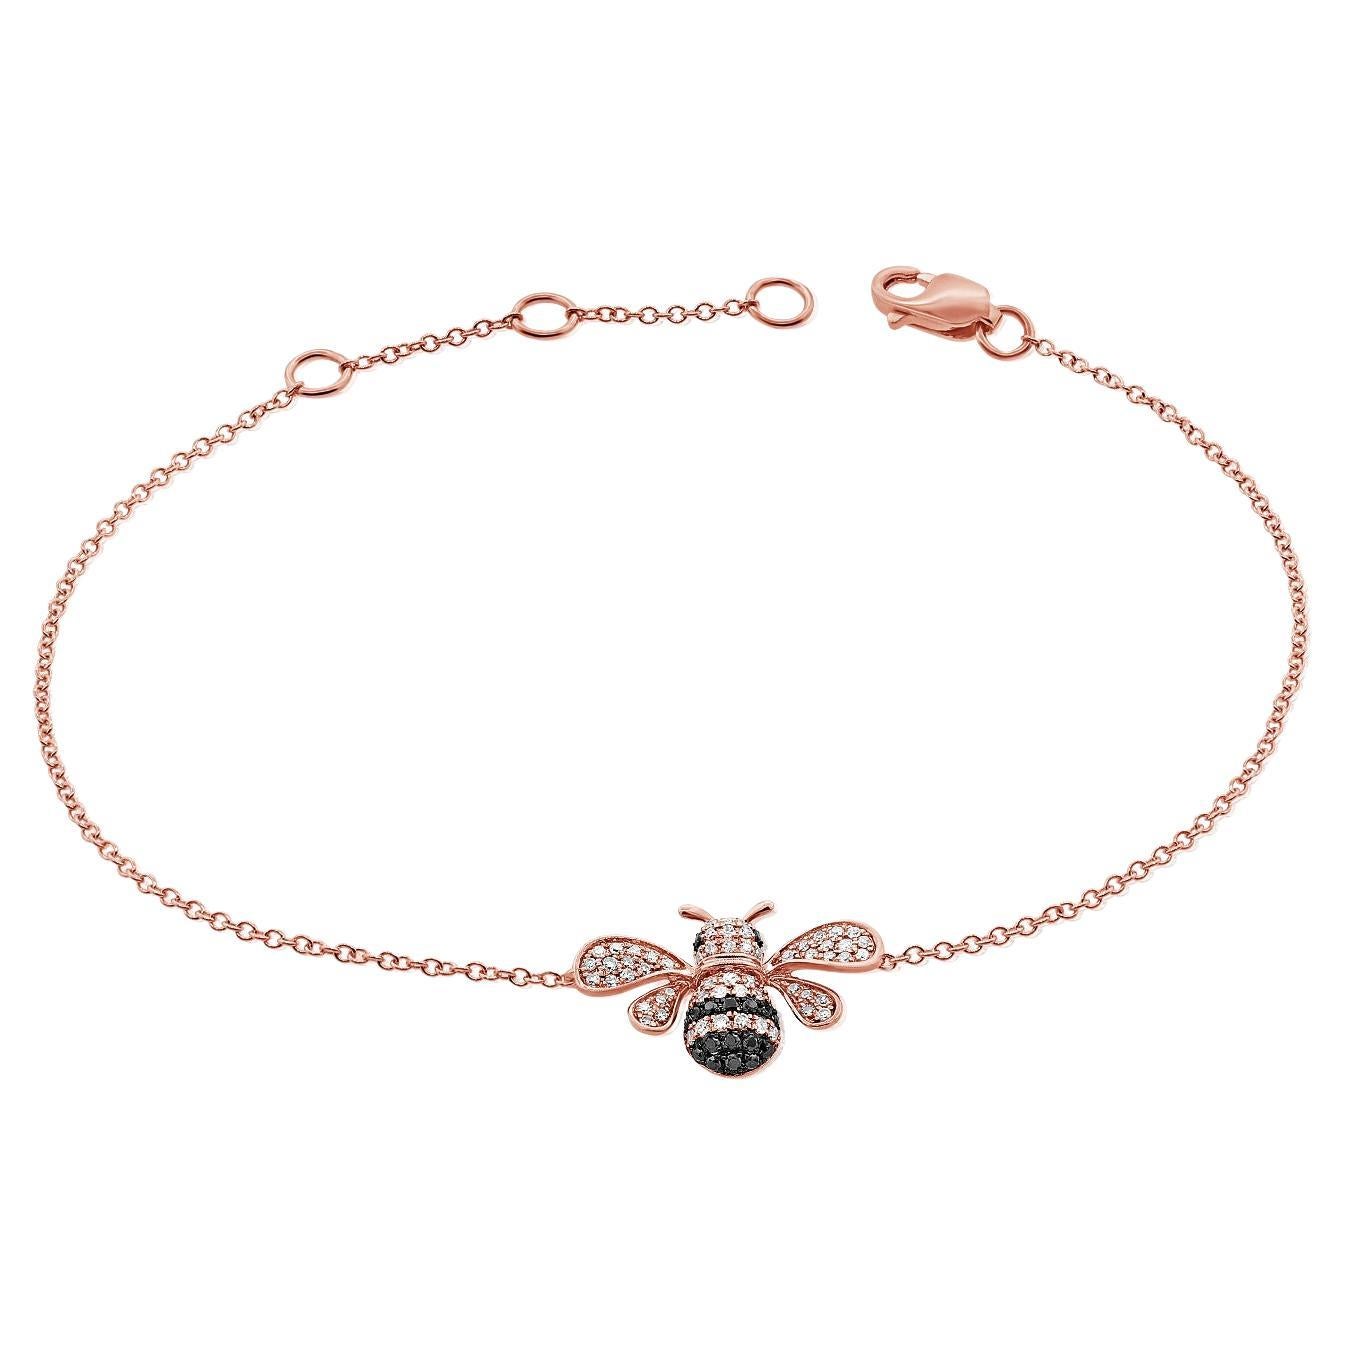 Cute Bumble Bee Bracelet – Honey and Stone